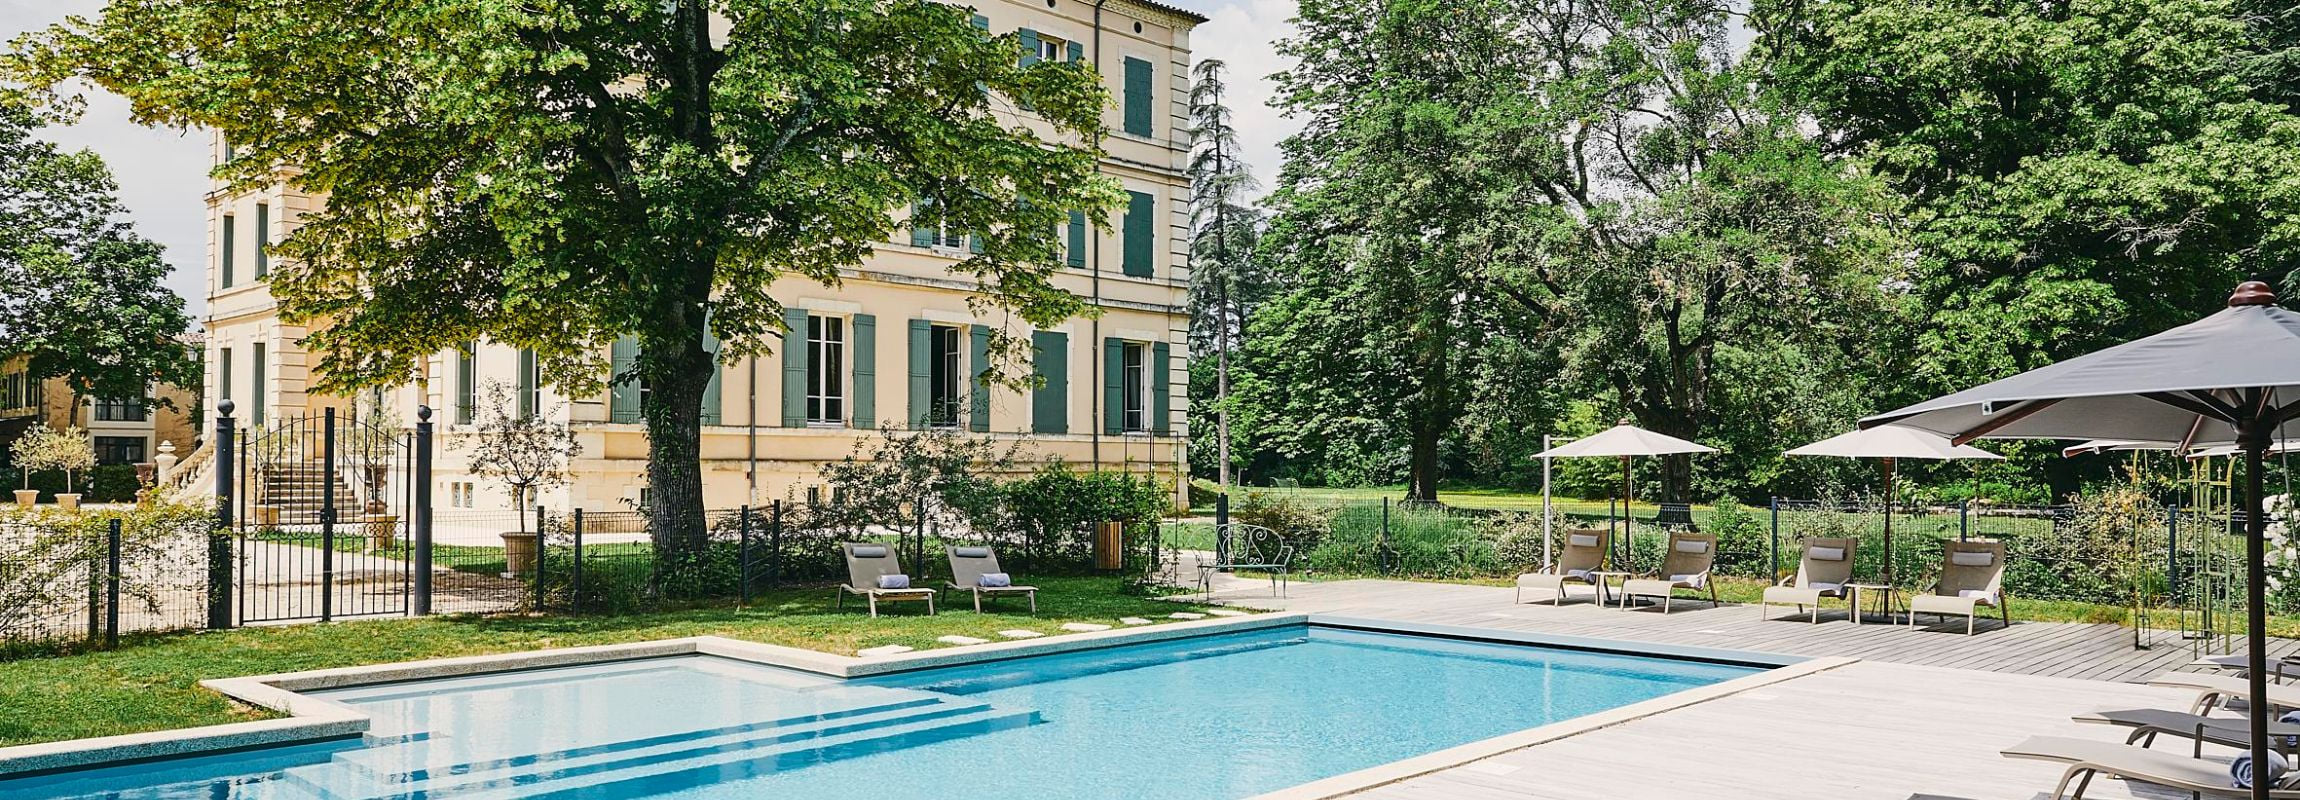 The swimming-pool at Château de Montcaud is perfectly located at the end of the tree-lined alley leading up to and through the estate